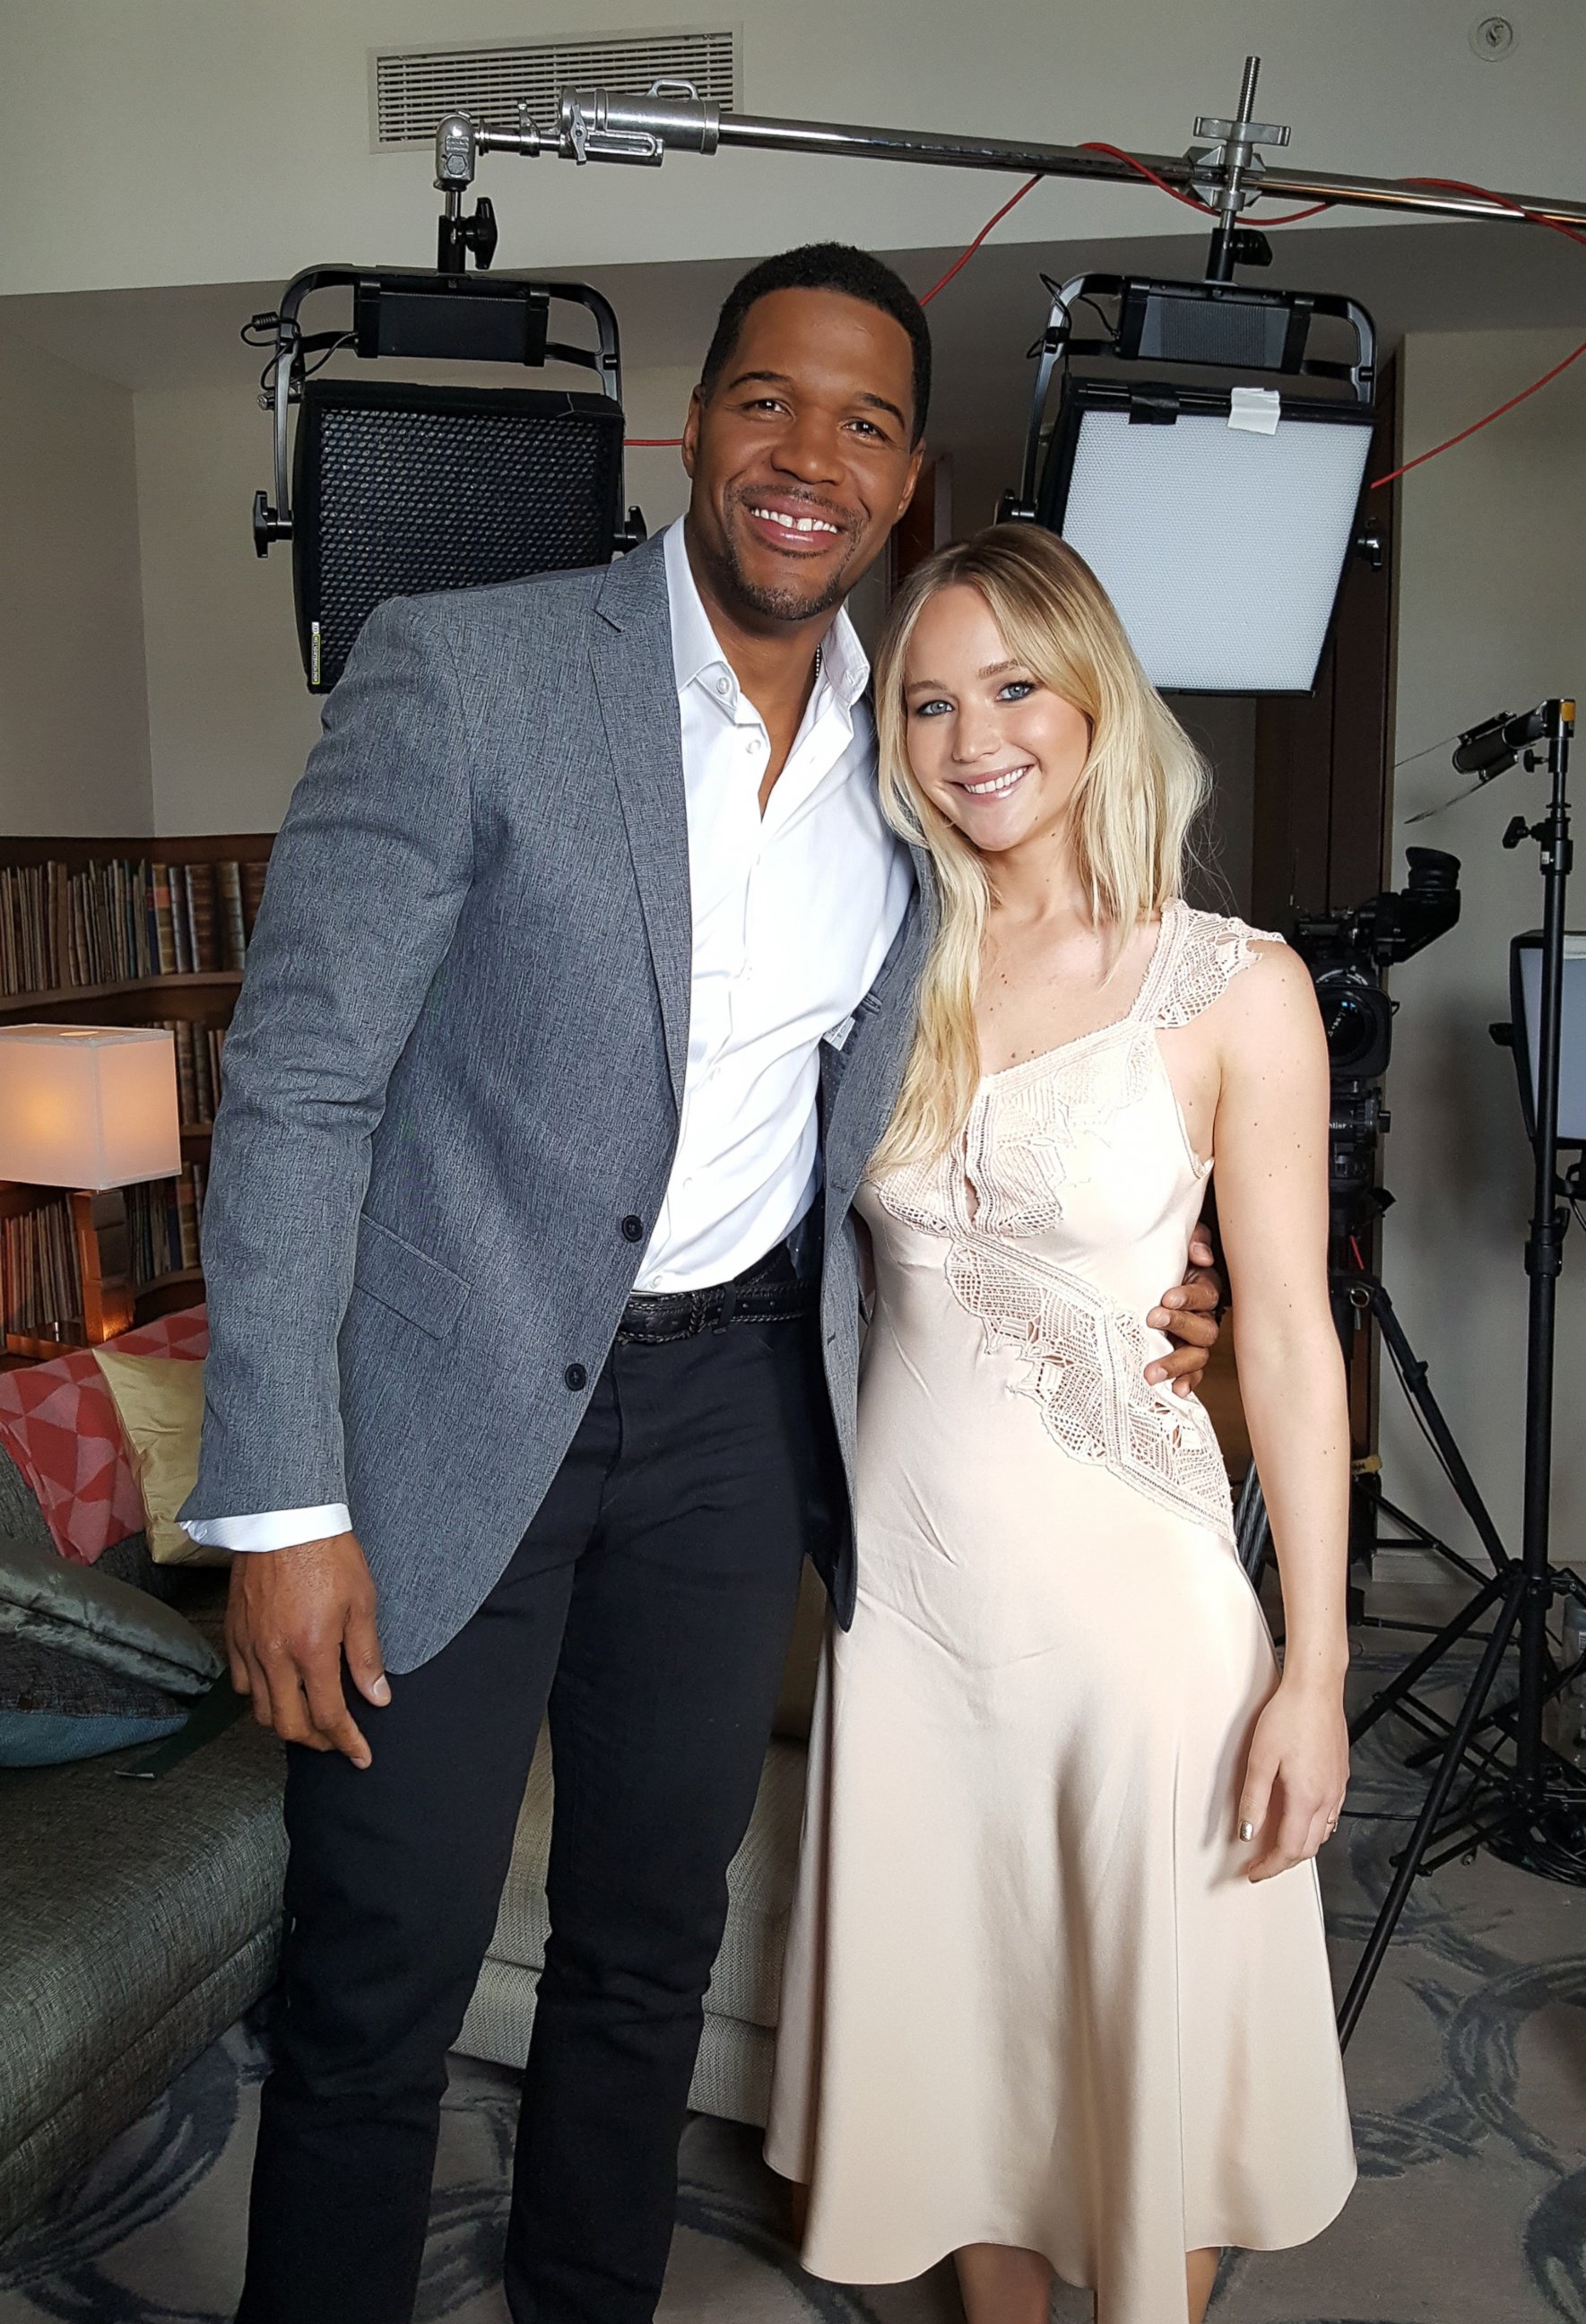 PHOTO: Jennifer Lawrence discusses her role in "Passengers" with Michael Strahan for "Good Morning America."